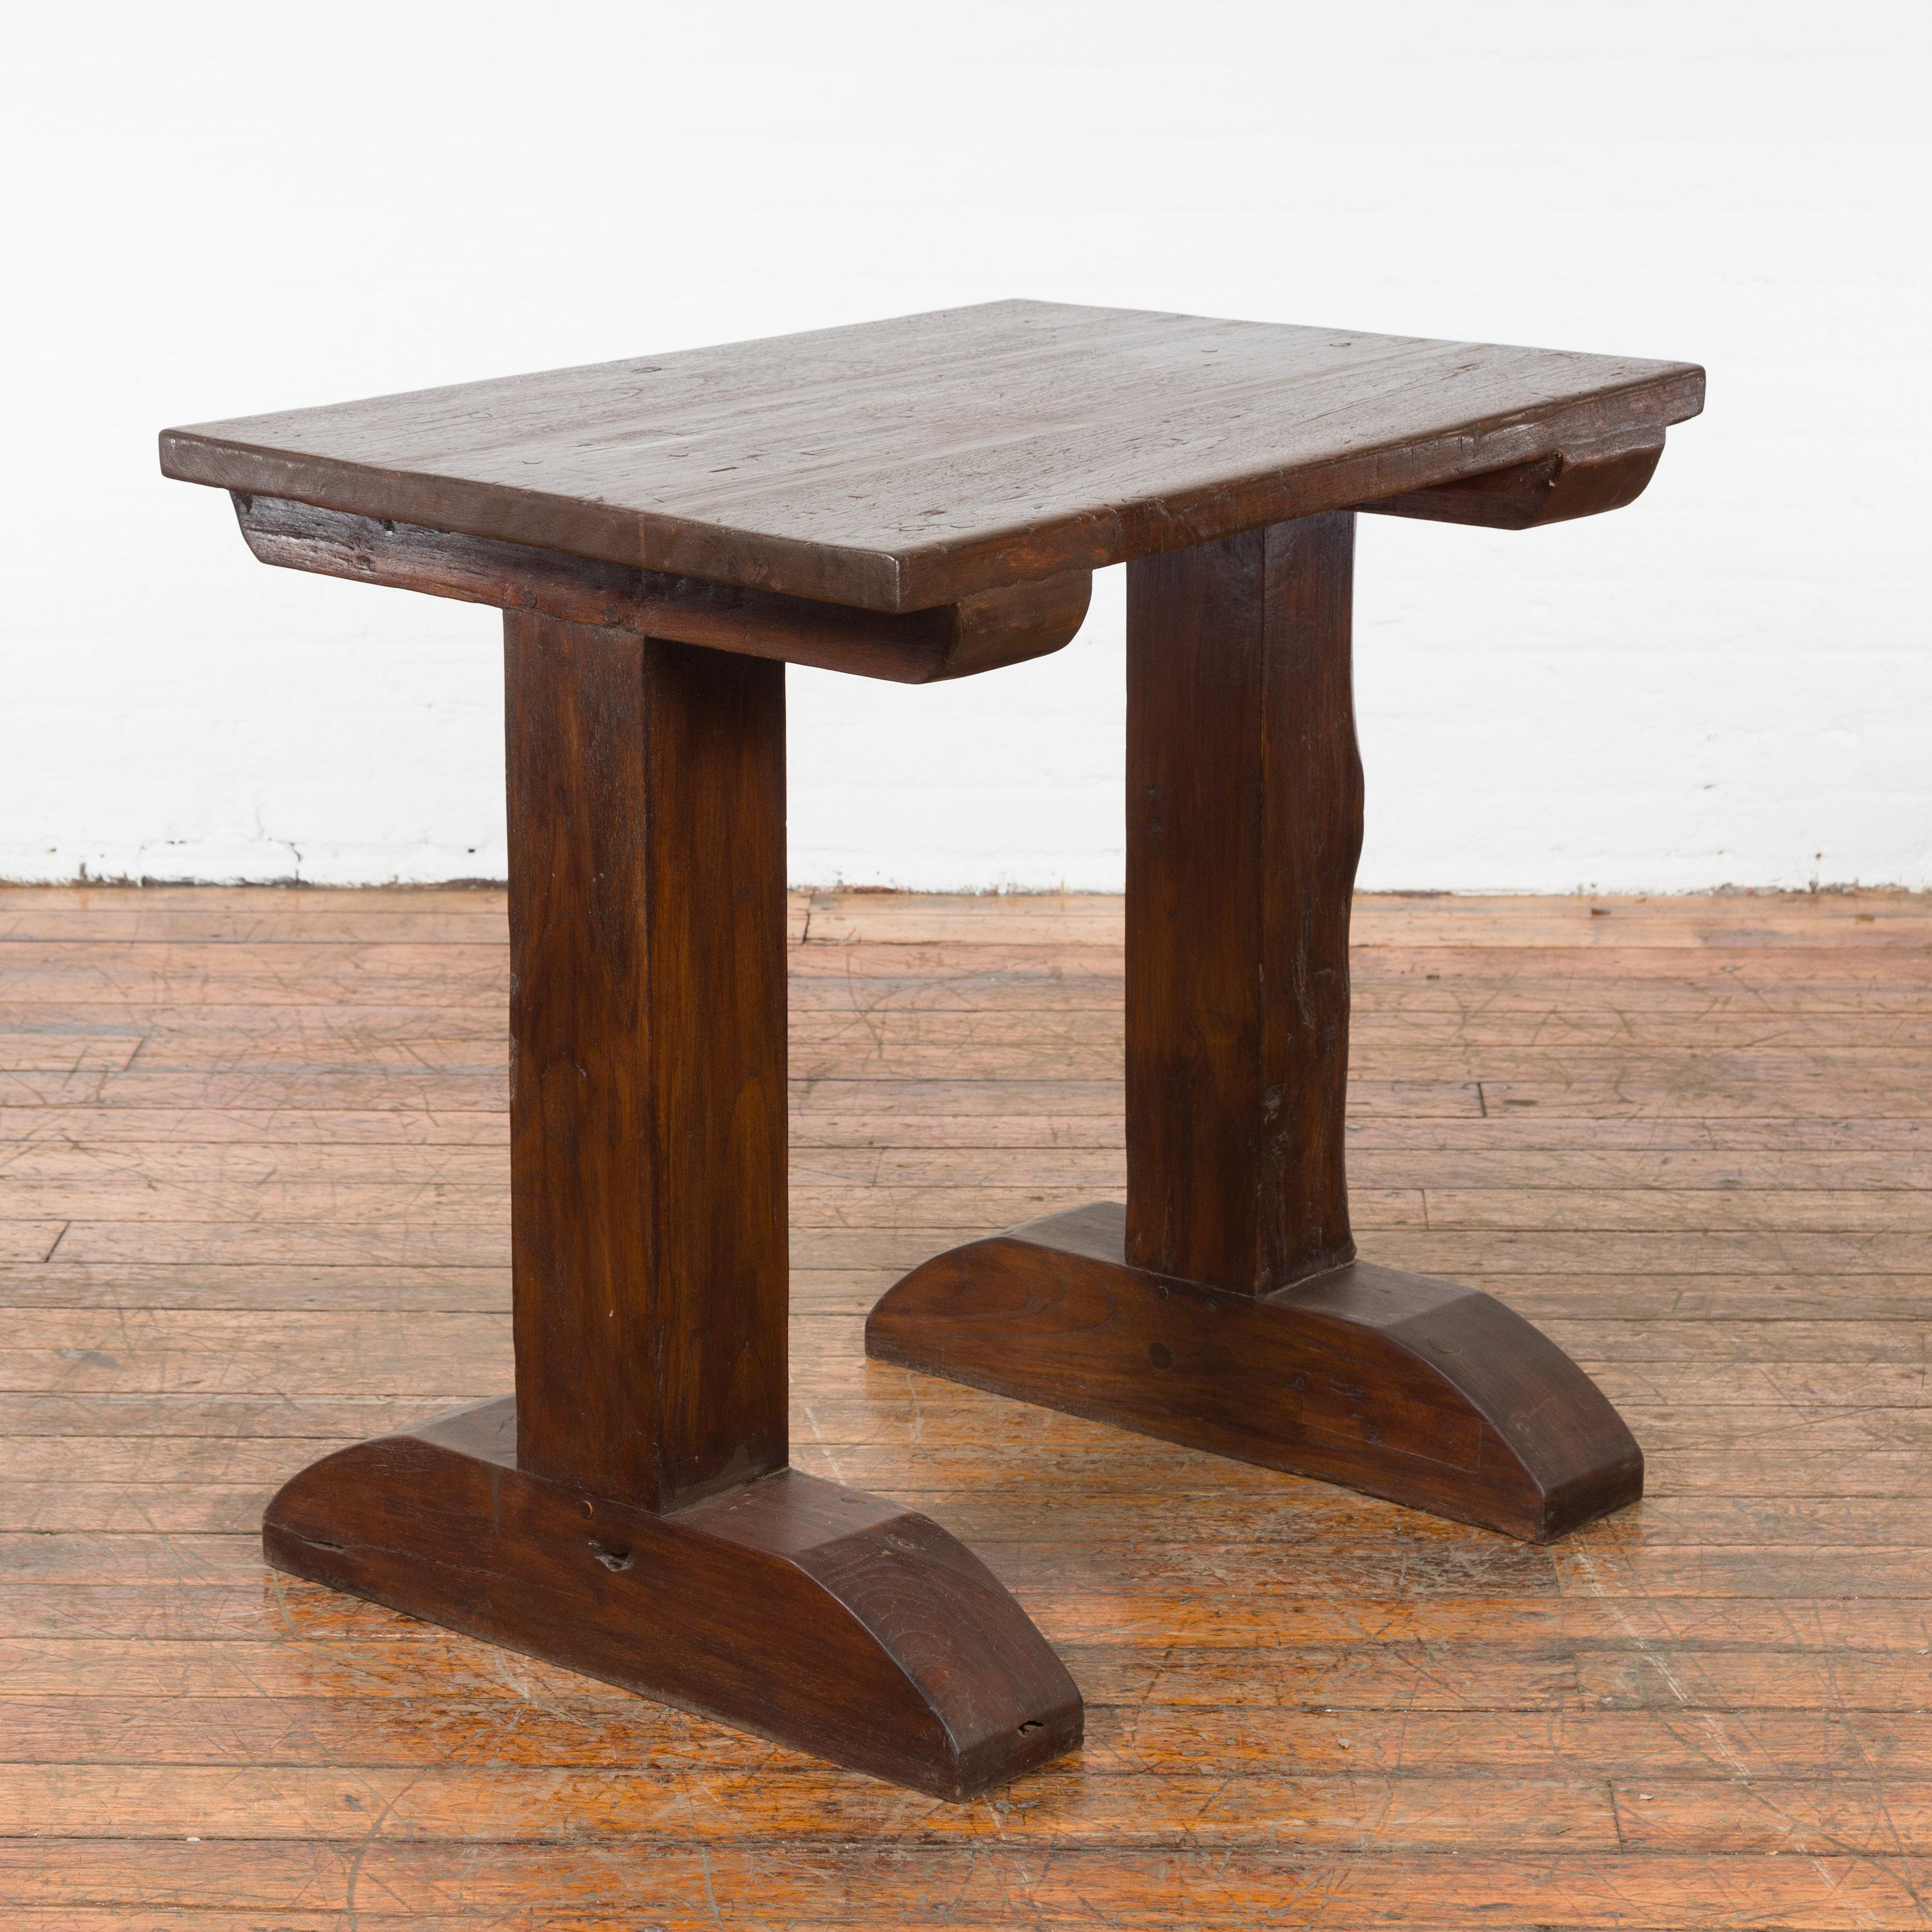 An Indonesian antique wine tasting table from the 19th century with trestle base. Created in Indonesia during the 19th century, this wine tasting table features a rectangular top sitting above a trestle base (sans stretcher). Boasting a nicely